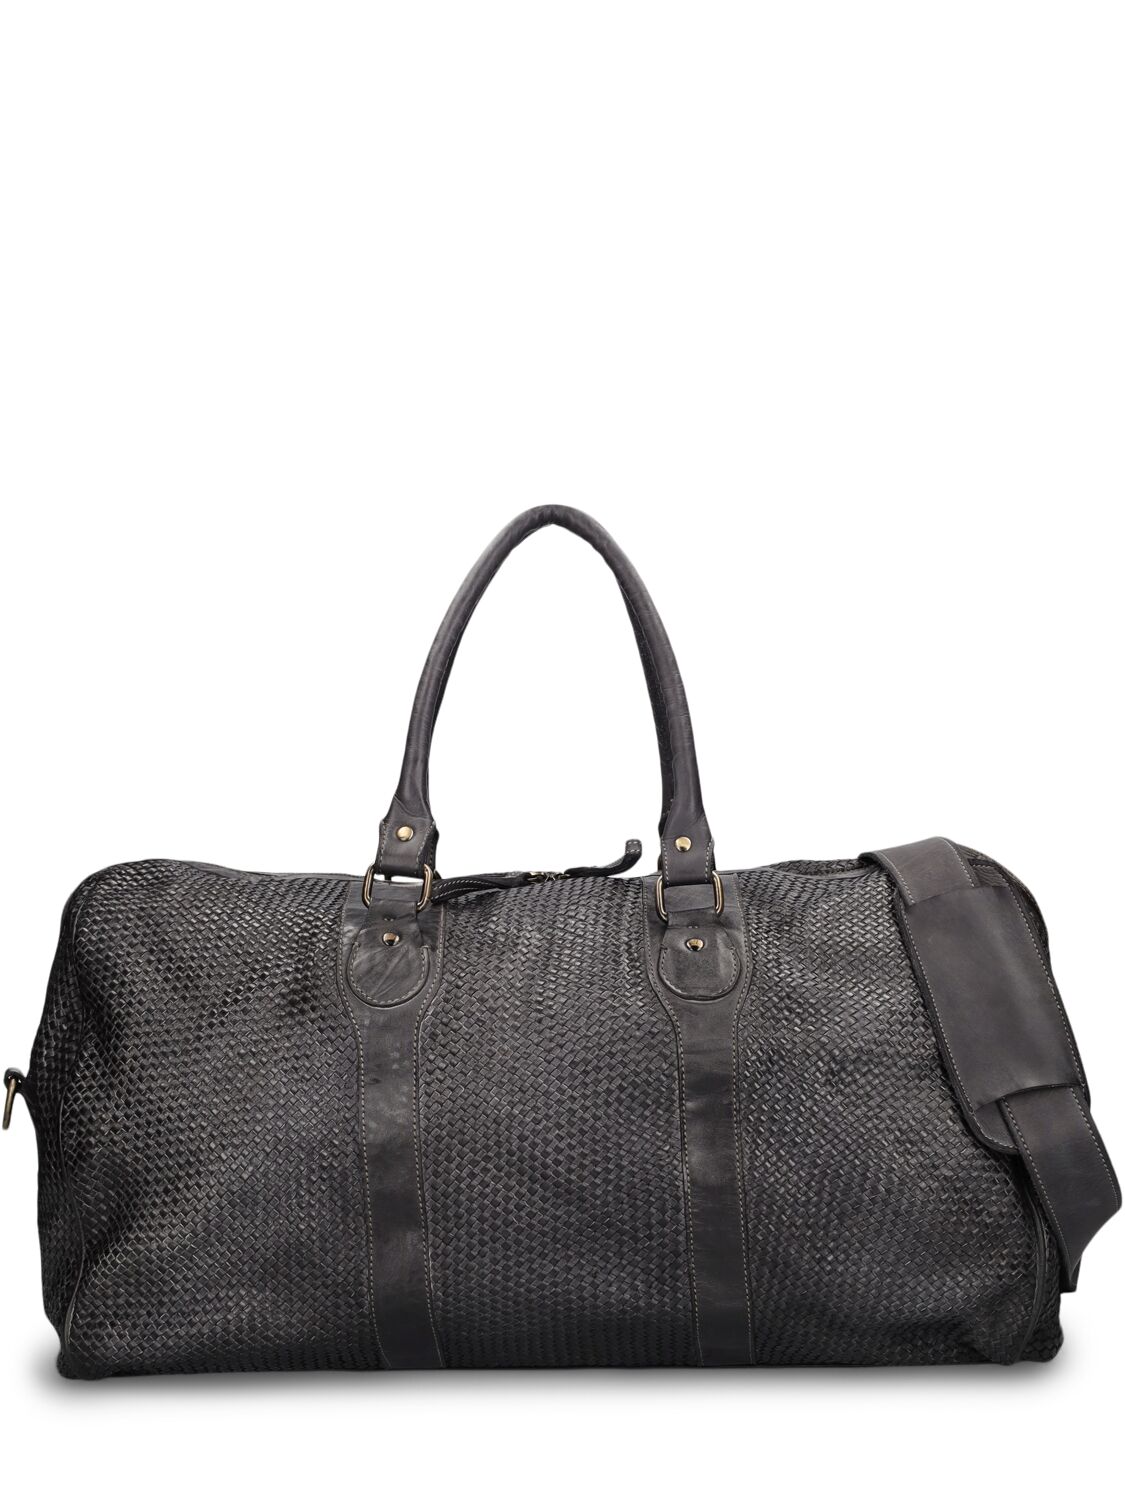 Image of Woven Leather Duffle Bag